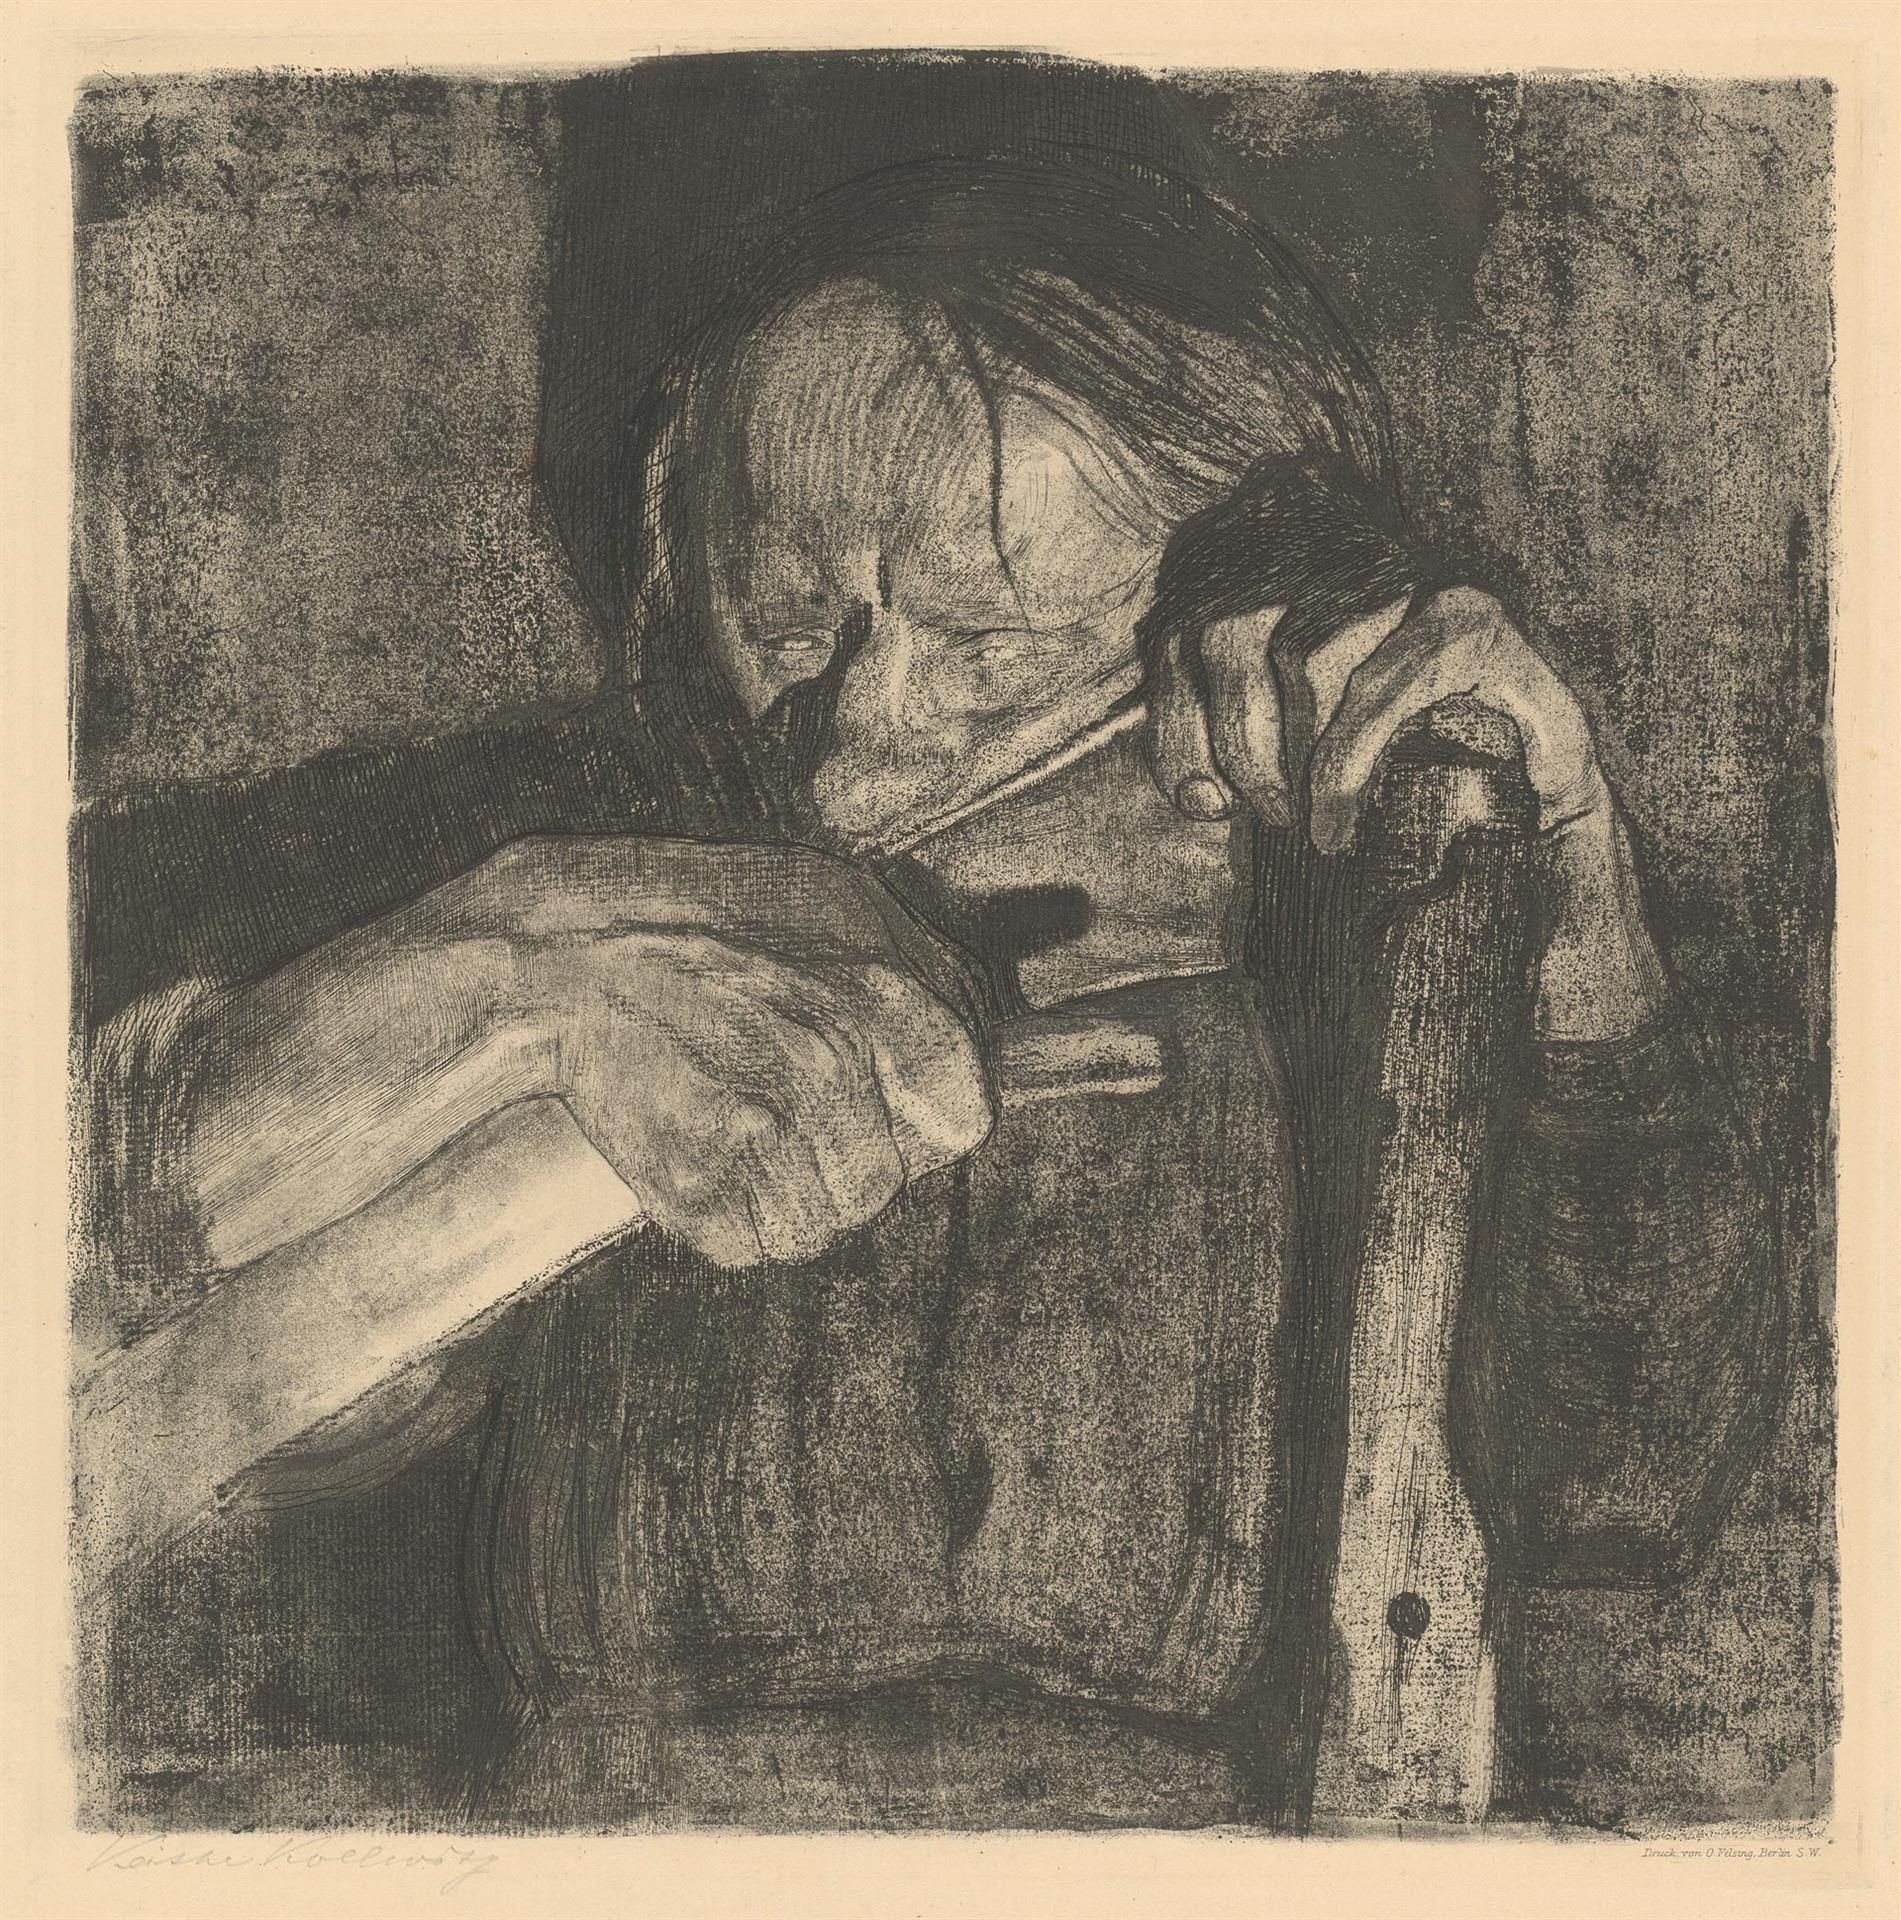 Käthe Kollwitz, Sharpening the Scythe, sheet 3 of the cycle »Peasants War«, 1908, line etching, drypoint, sandpaper, aquatint and soft ground with imprint of laid paper and Ziegler's transfer paper, Kn 88 X b, Cologne Kollwitz Collection © Käthe Kollwitz Museum Köln